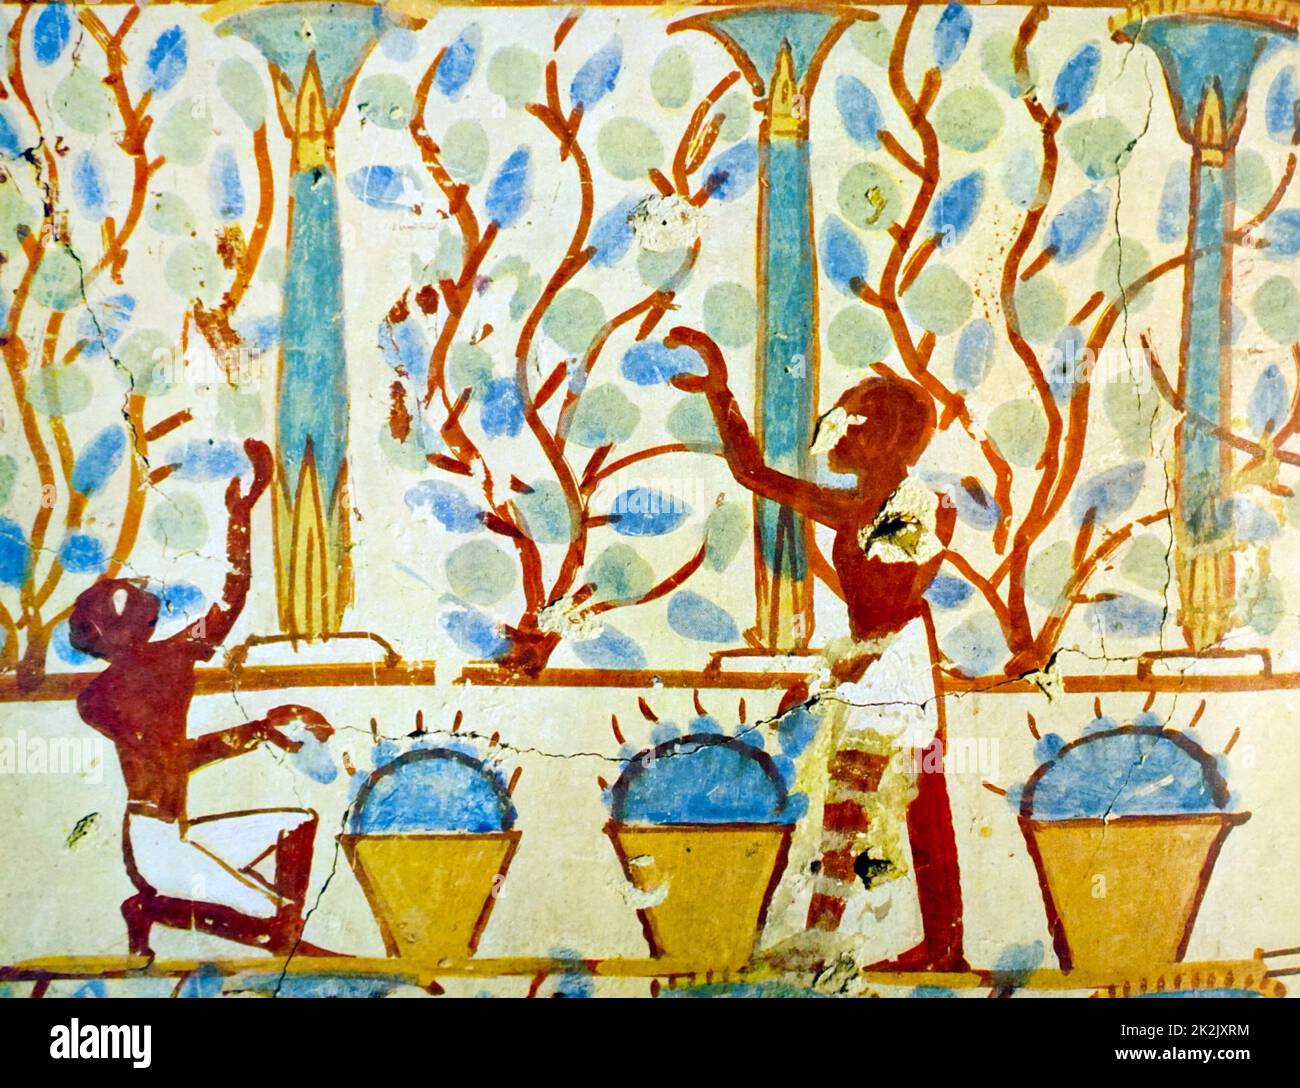 Egyptian tomb wall painting from Thebes, Luxor. Dated 11th Century BC Stock Photo